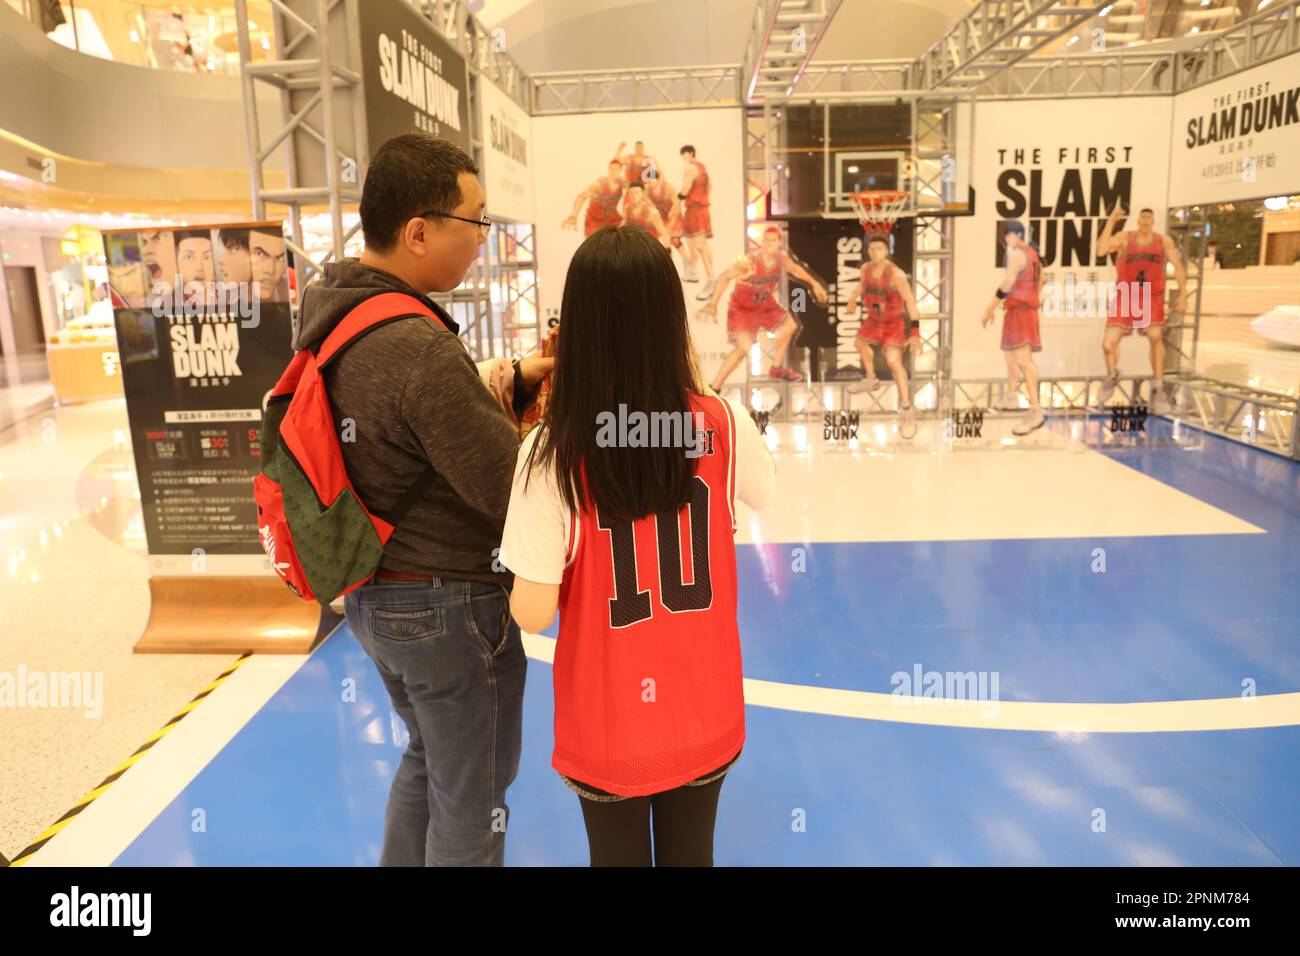 SHANGHAI, CHINA - APRIL 19, 2023 - Fans watch a mini basketball court of the animated movie Slam Dunk at a movie theater in Shanghai, China, April 19, Stock Photo